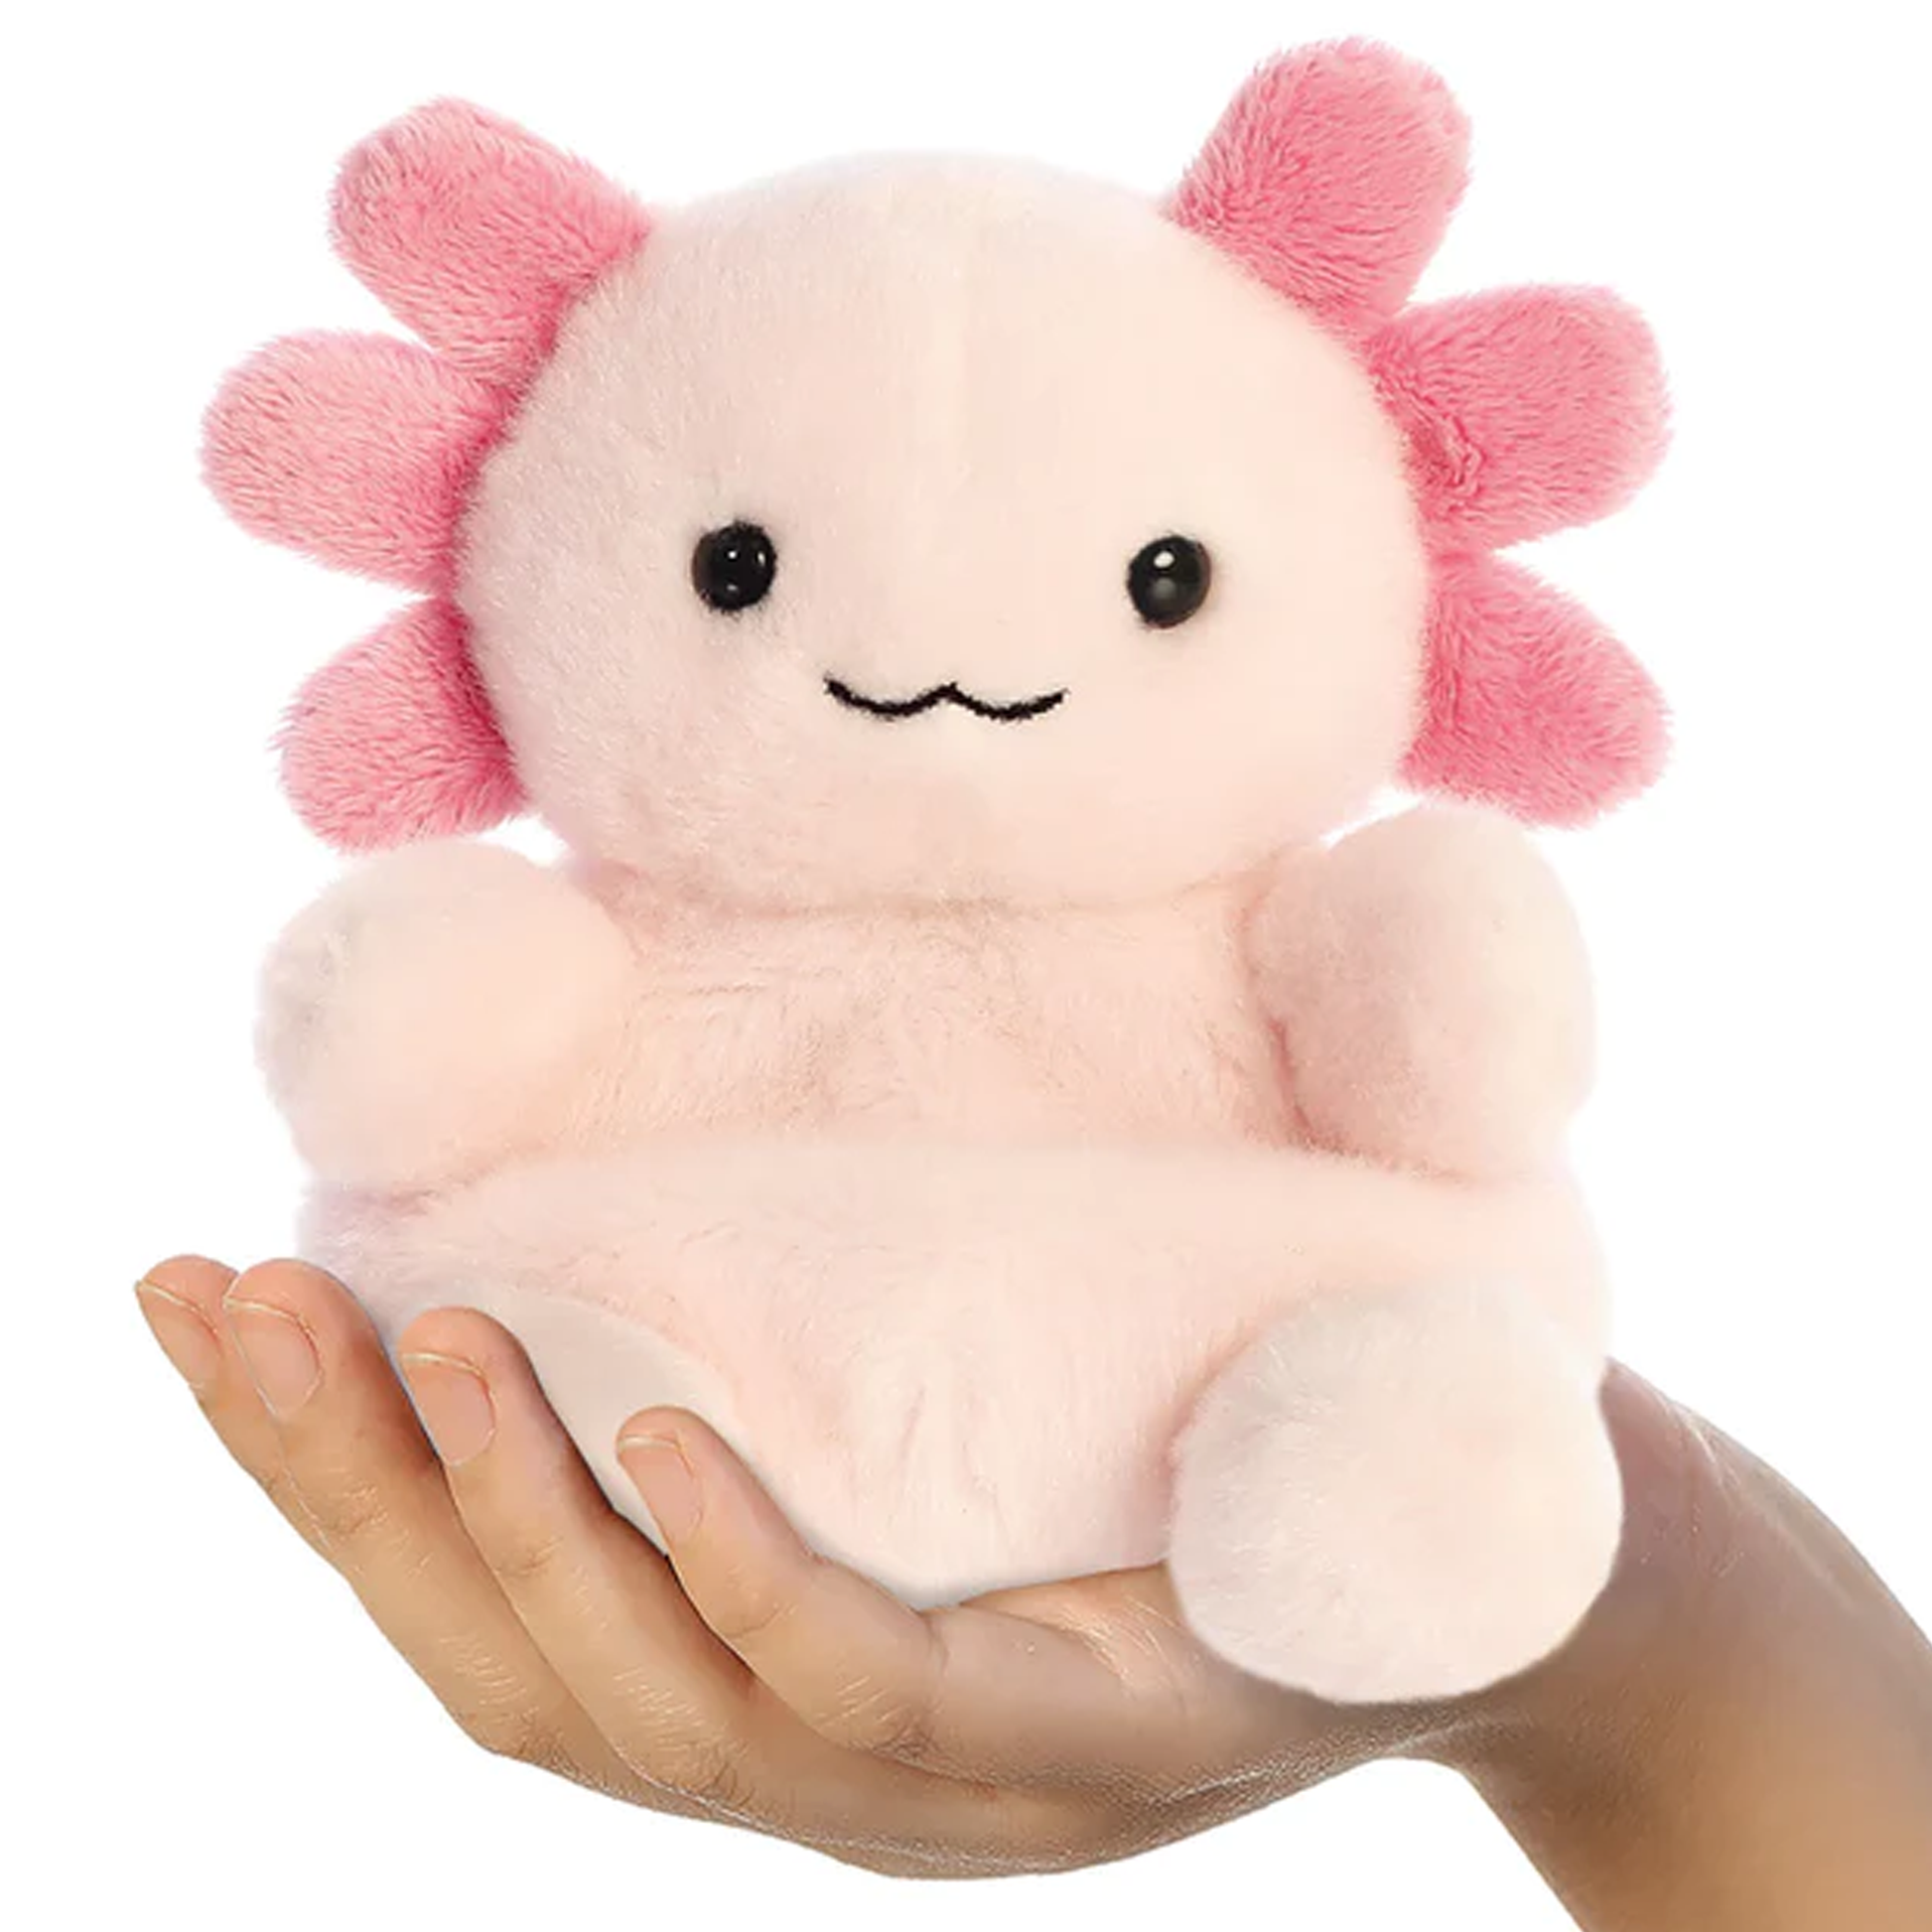 Arwen the Axolotl Palm Pal Soft Toy in a Person's Hand | Happy Piranha